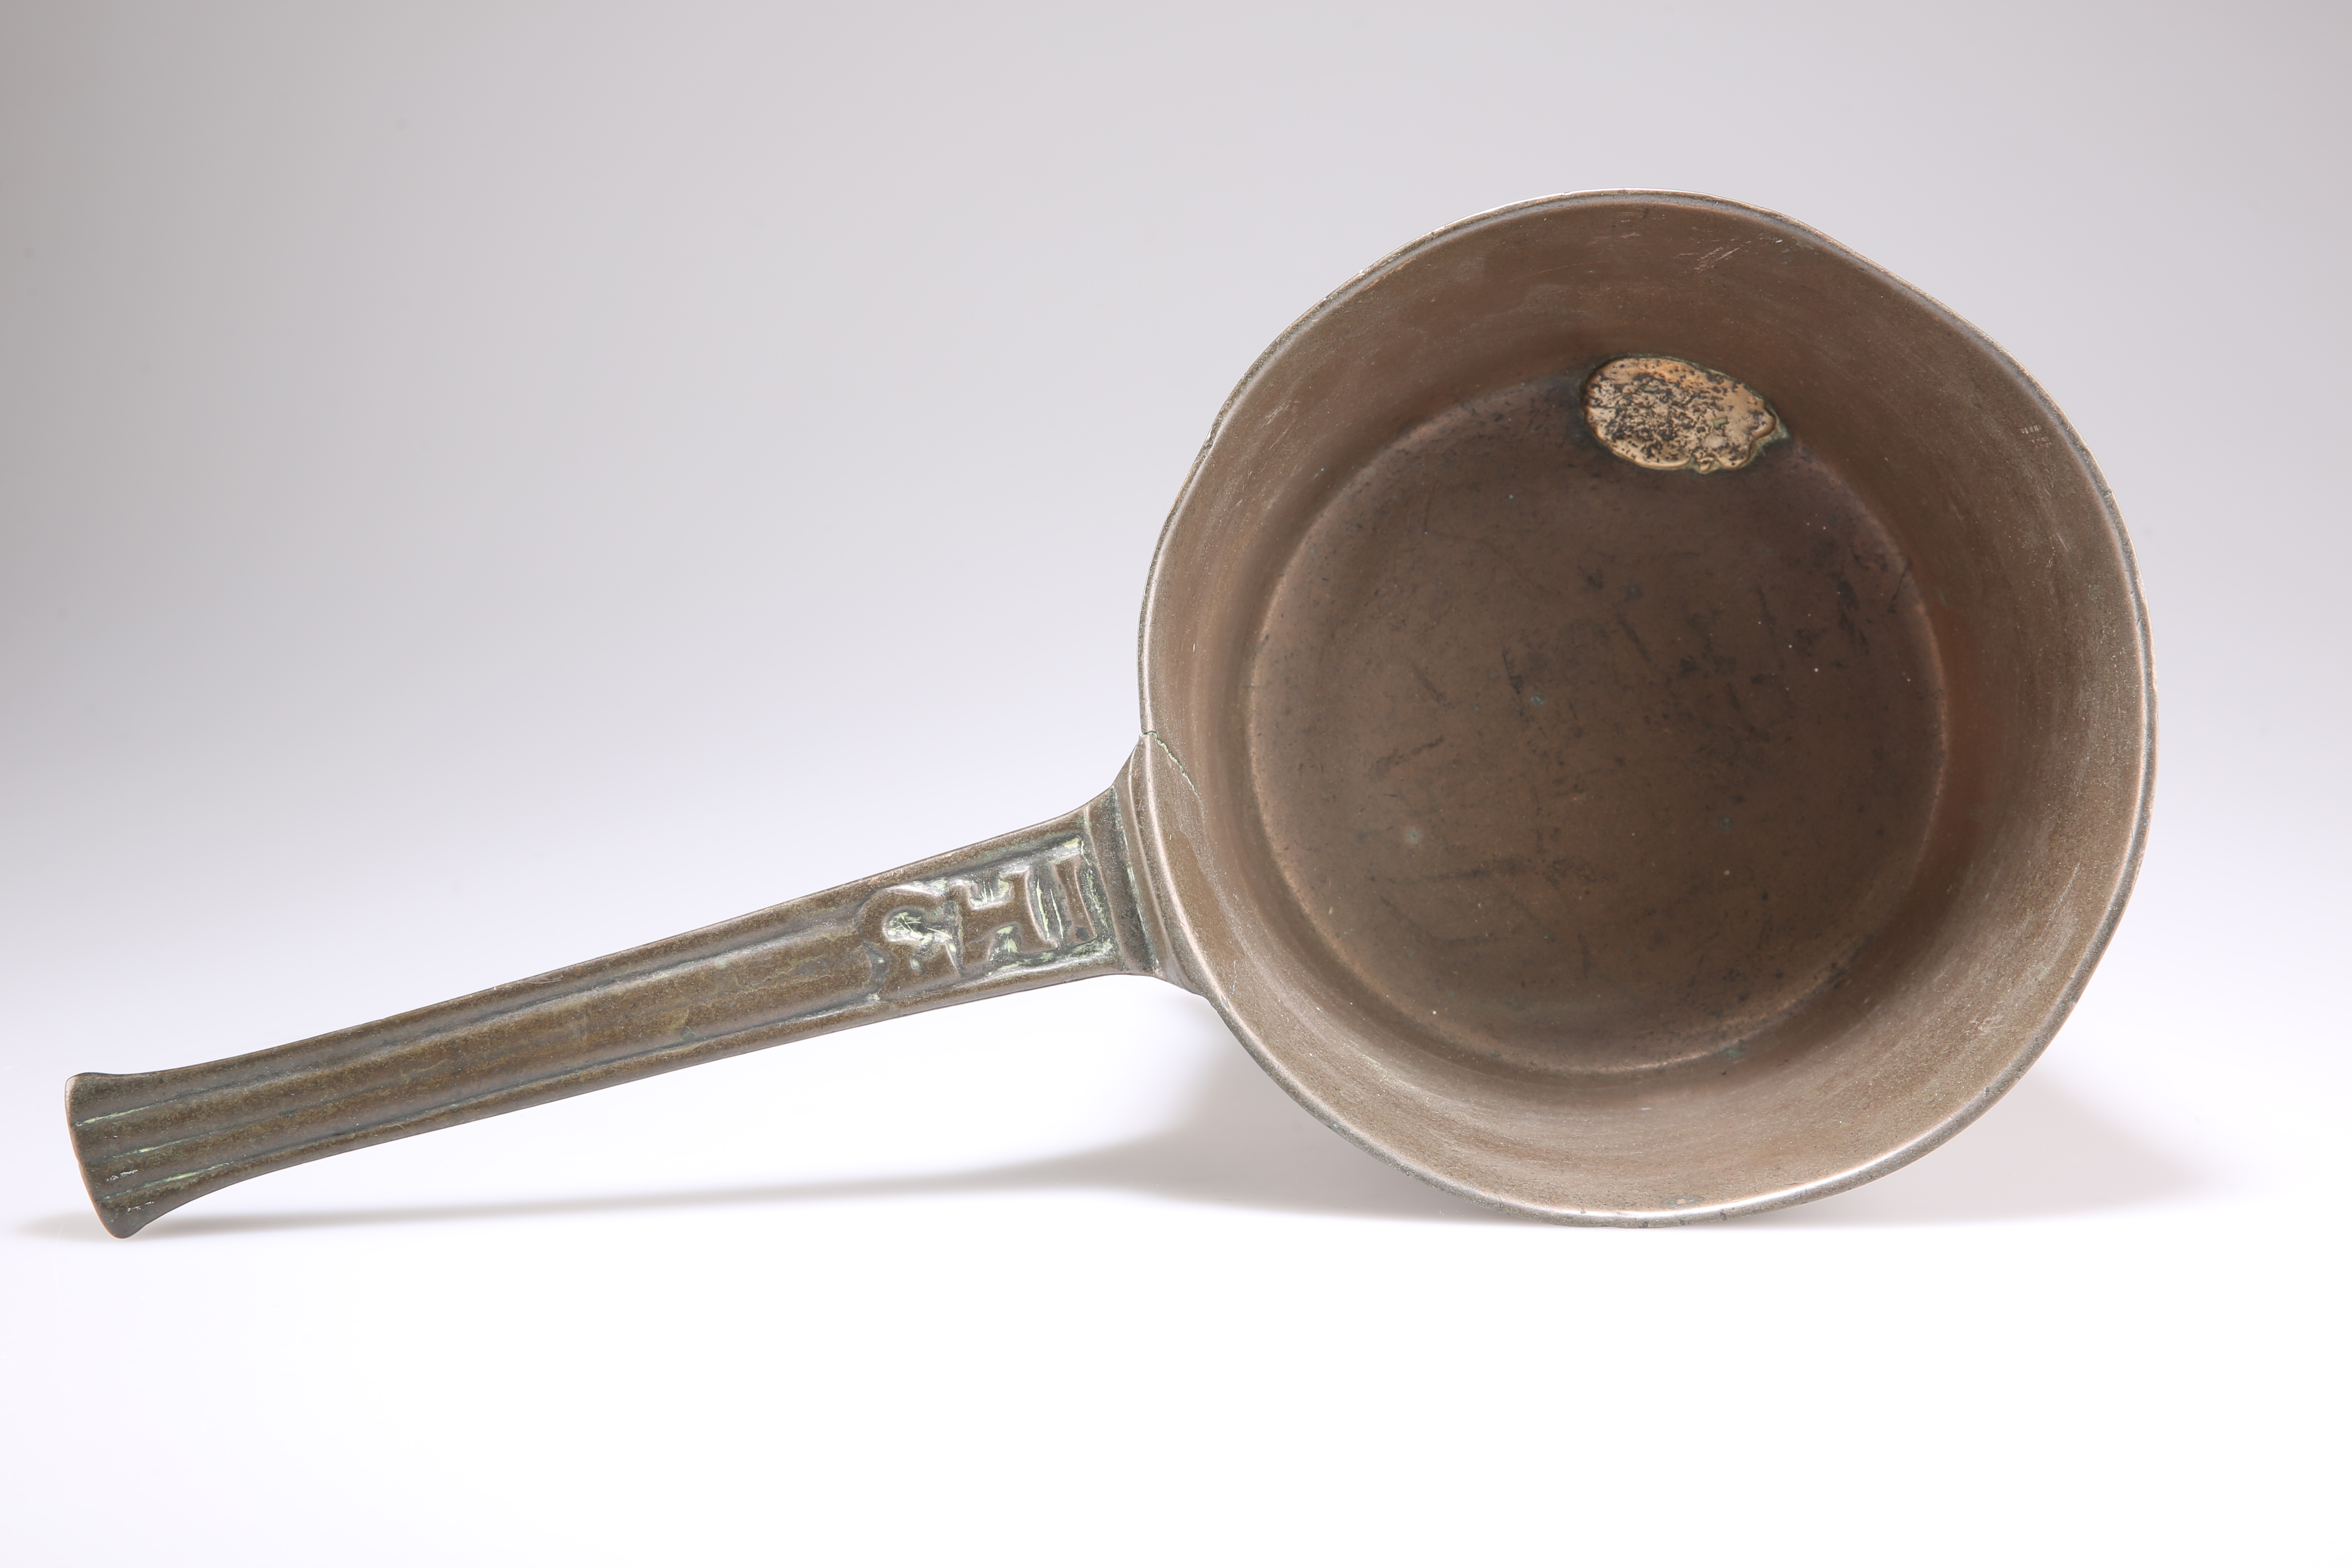 AN 18TH CENTURY BRONZE OR BELL-METAL SKILLET - Image 2 of 3